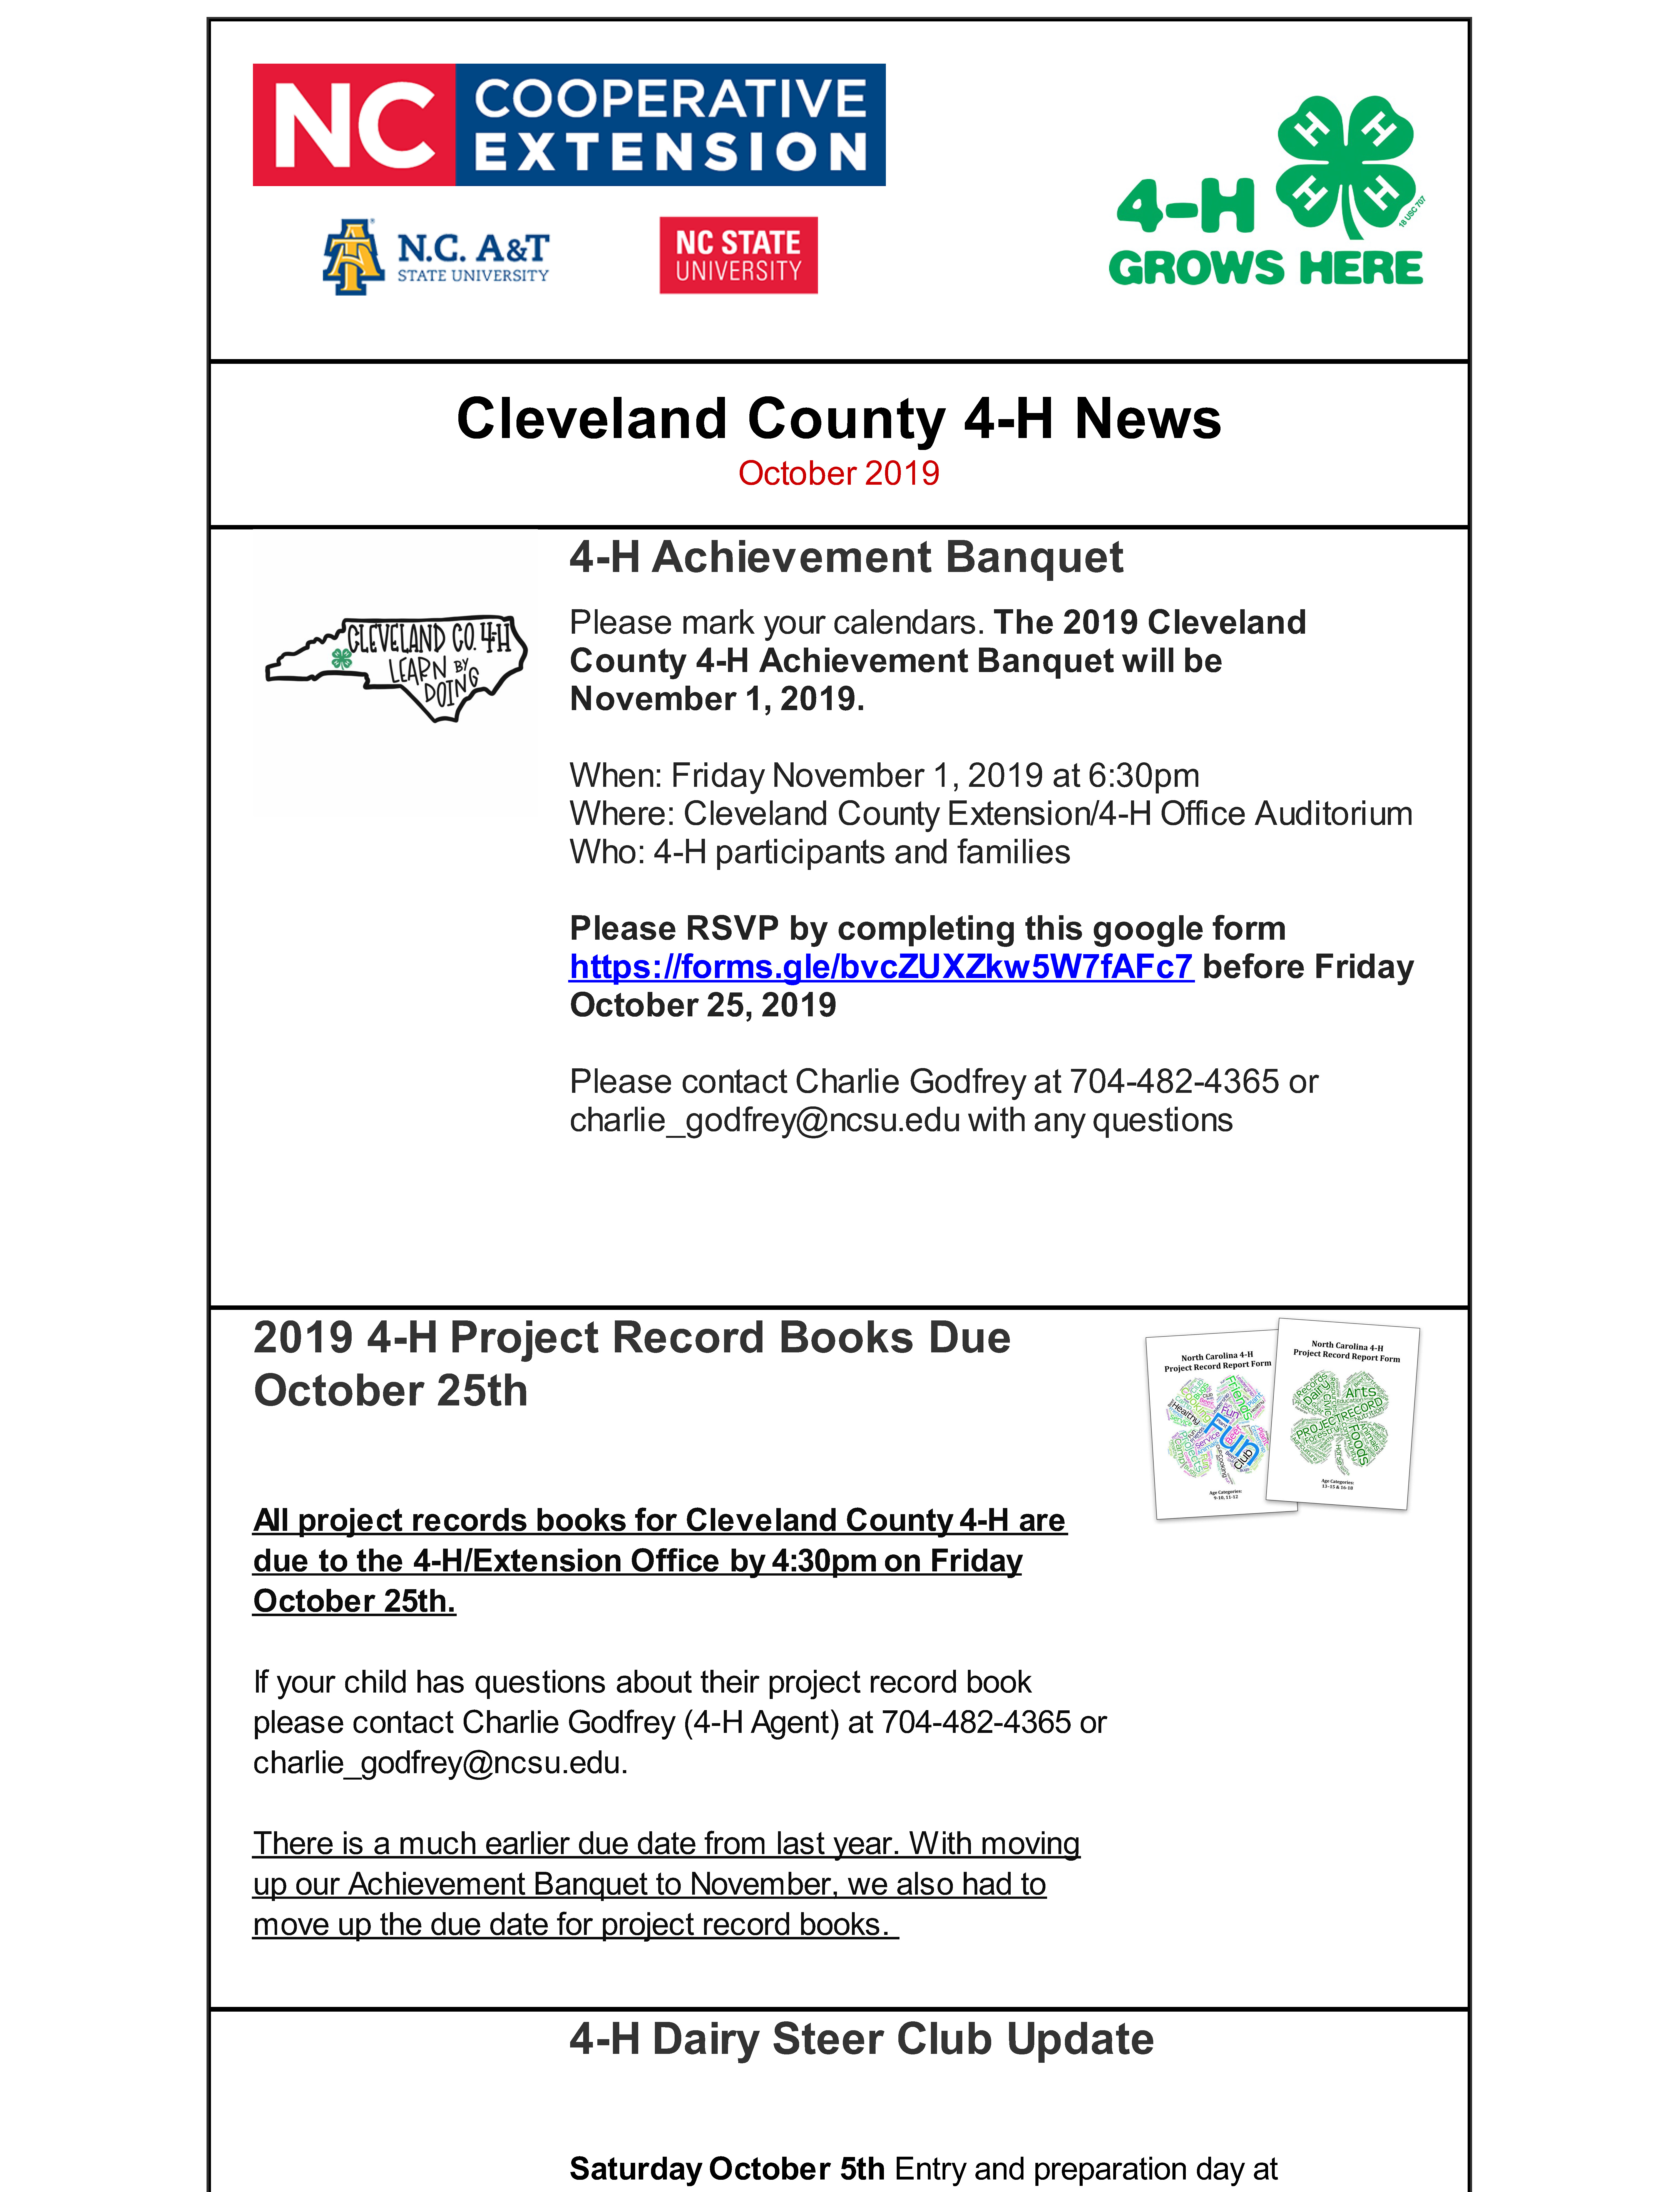 Cleveland County 4-H Newsletter page 1